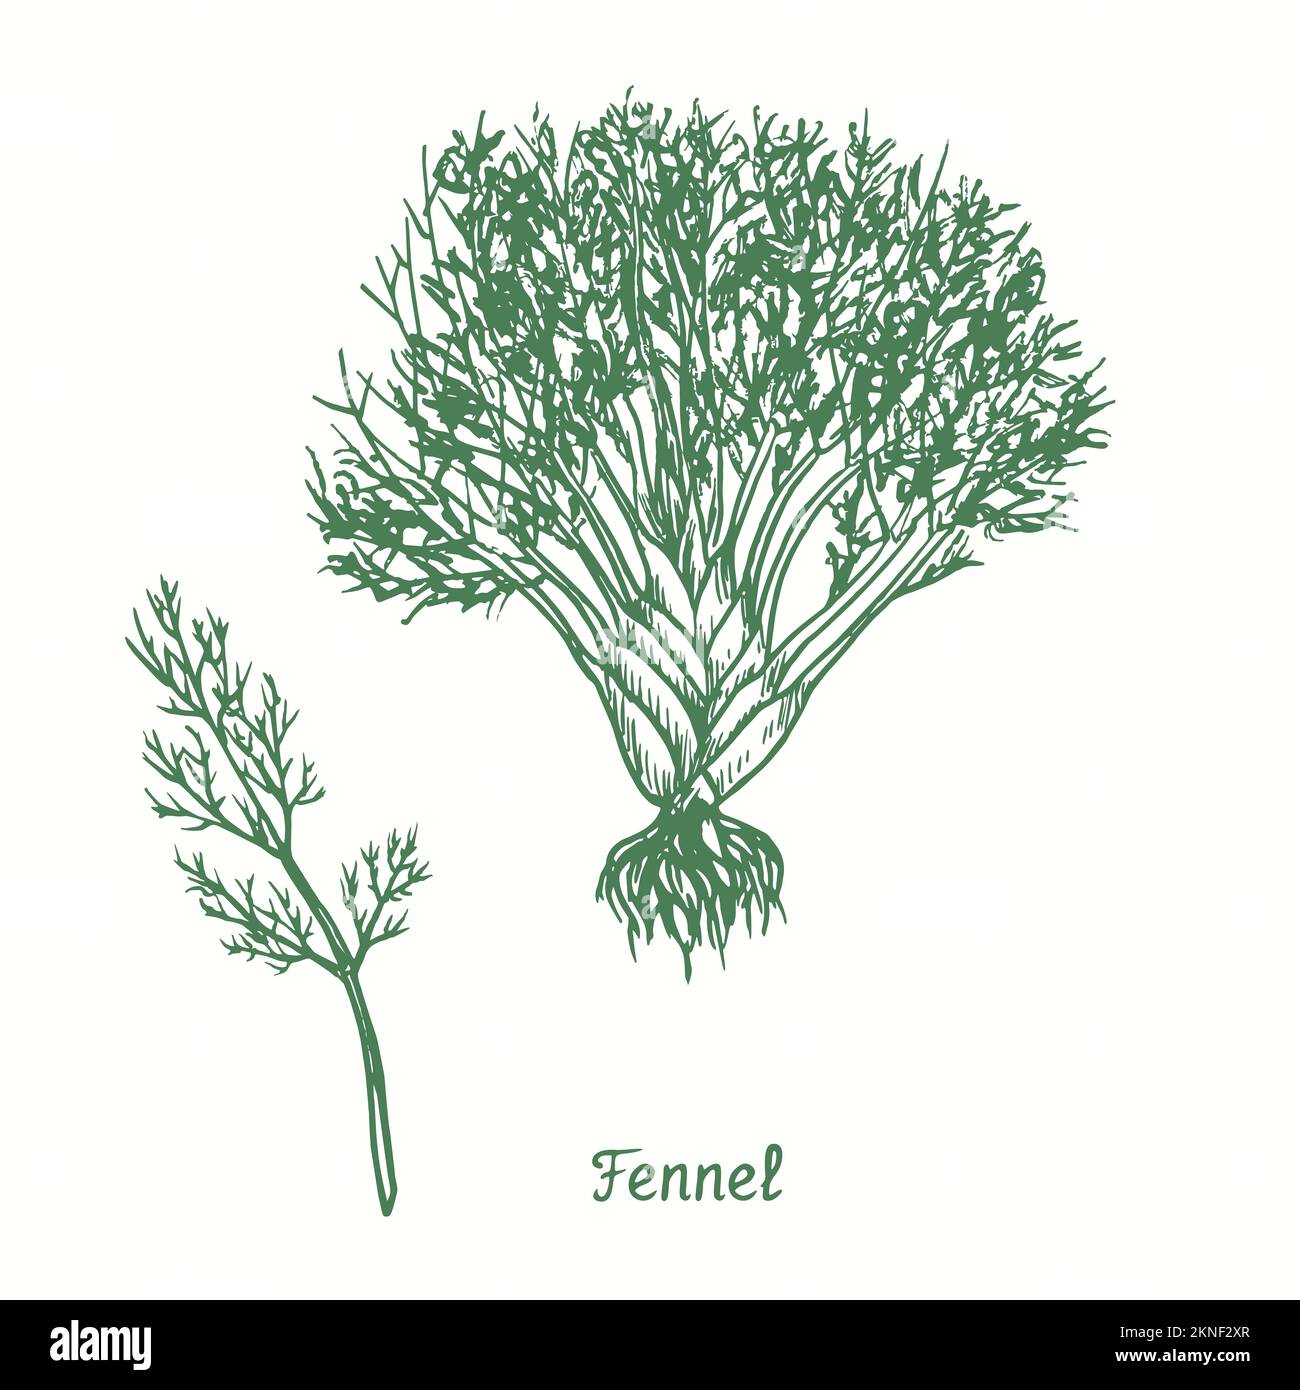 Fennel green twig and plant with roots.  Ink black and white doodle drawing in woodcut style Stock Photo